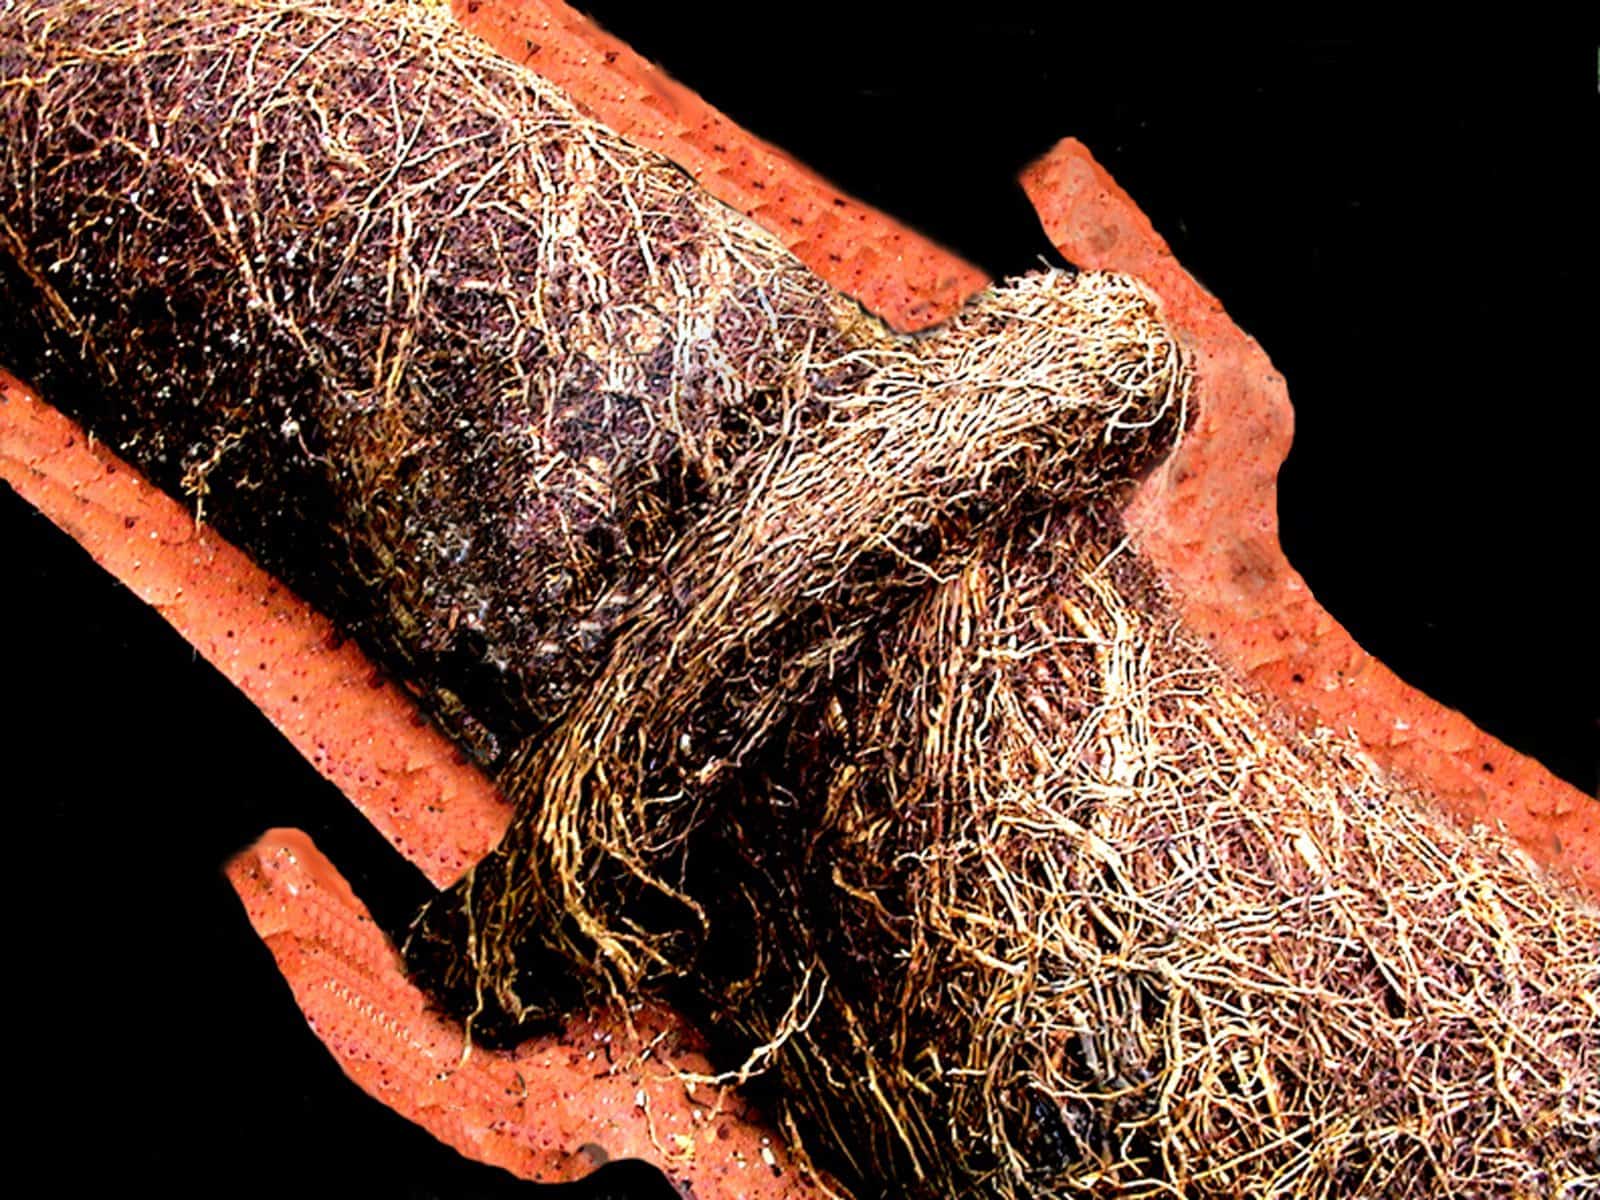 roots inside underground pipe clay sewer pipe